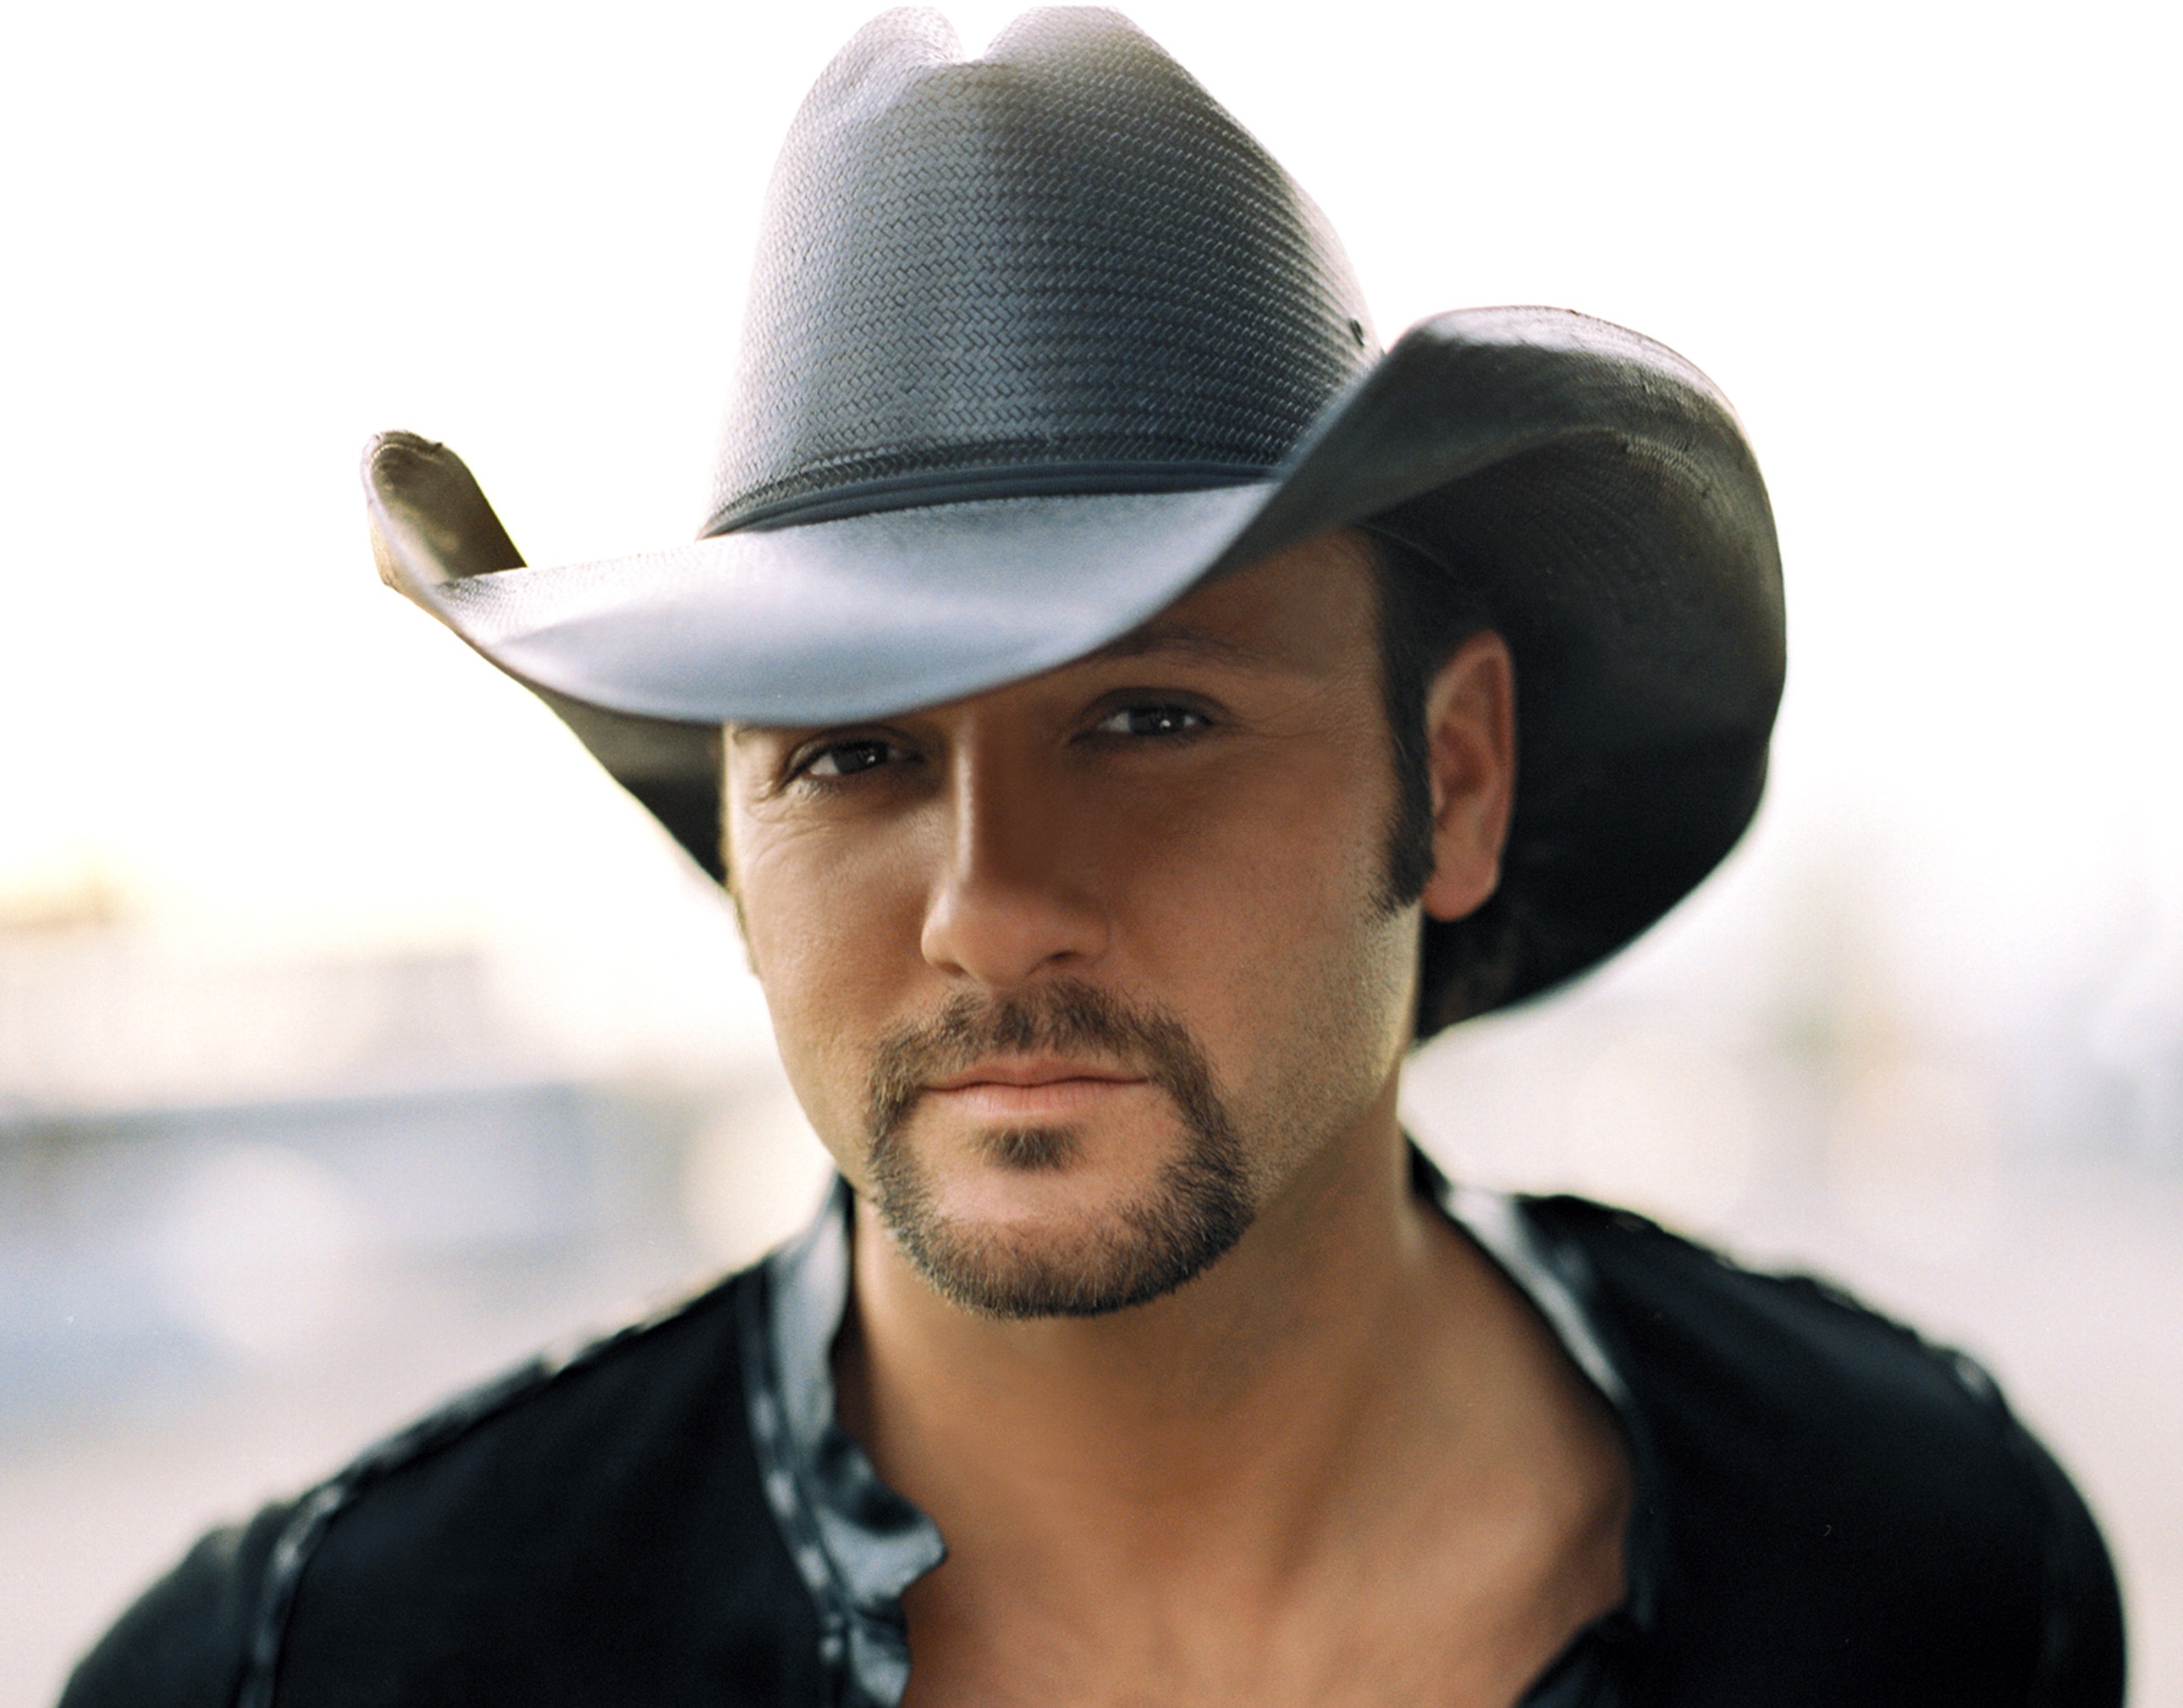 Tim Mcgraw Backgrounds, Compatible - PC, Mobile, Gadgets| 2579x2018 px